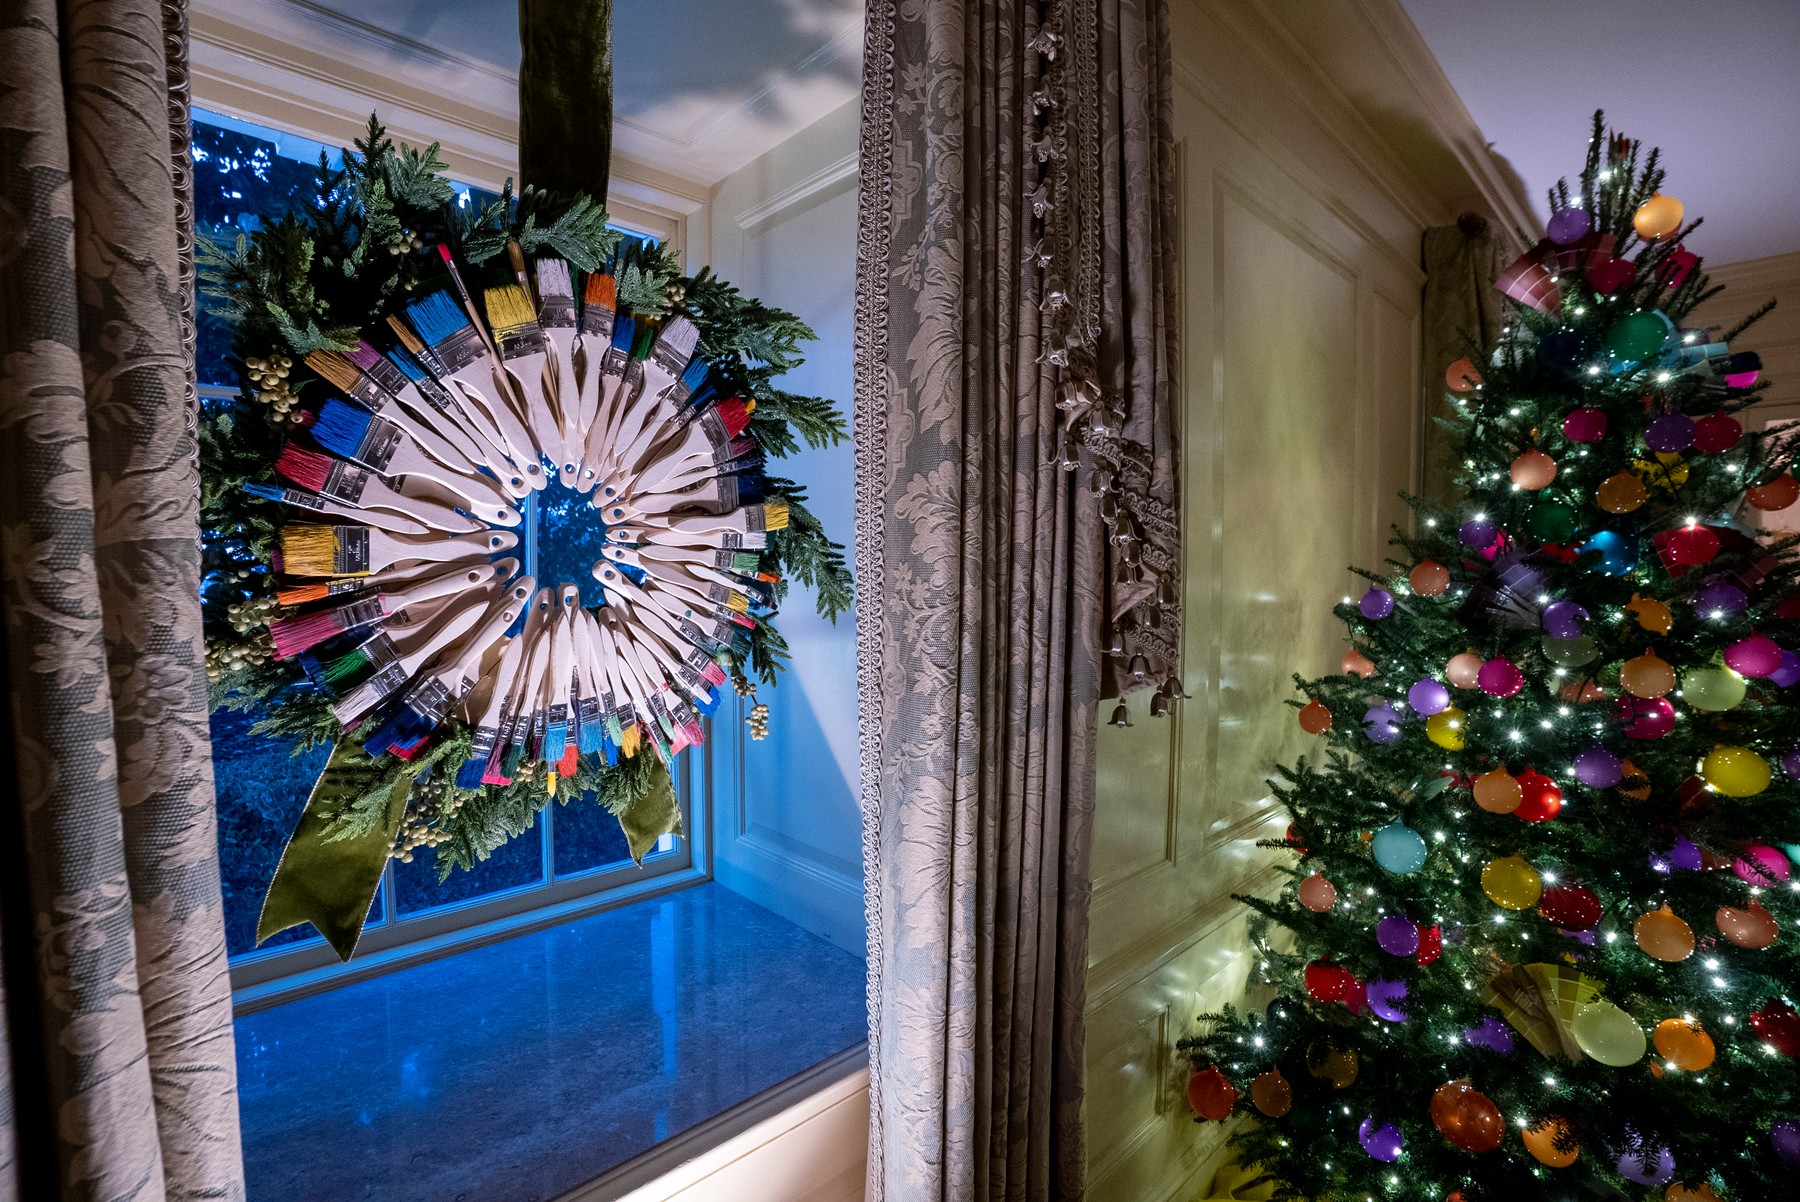 Christmas Decoratons at the White House.